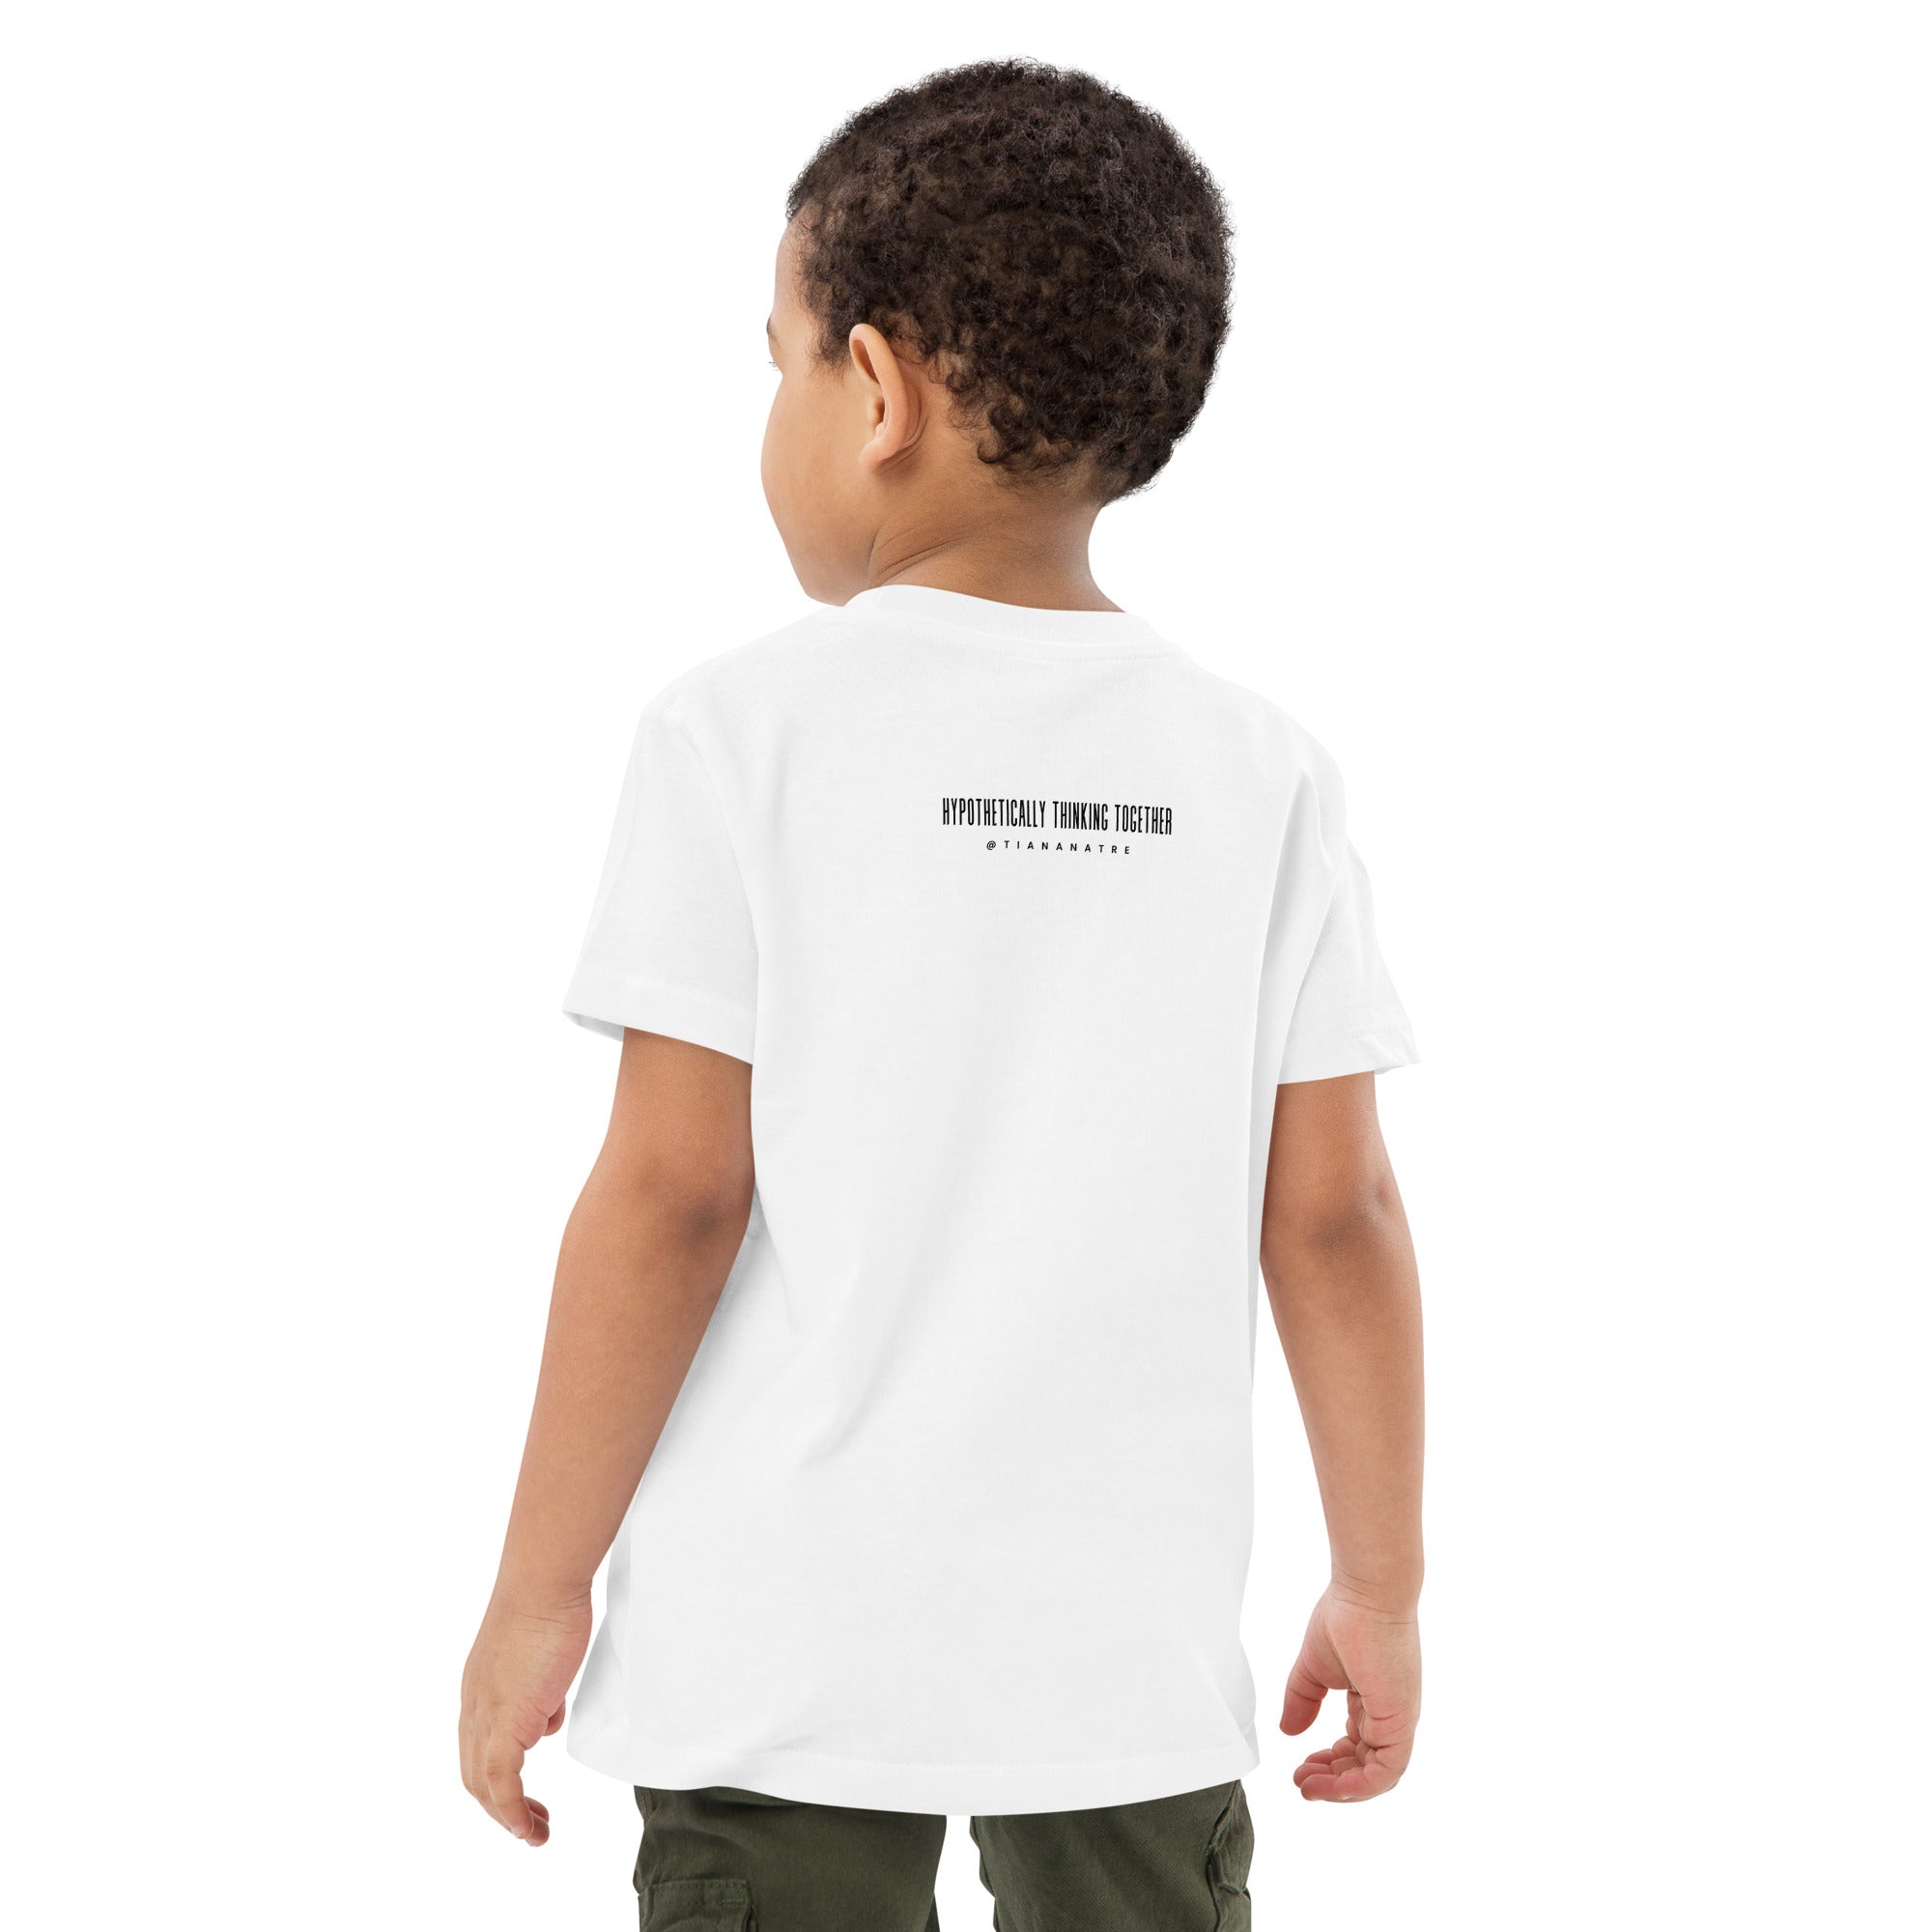 This or That kids t-shirt